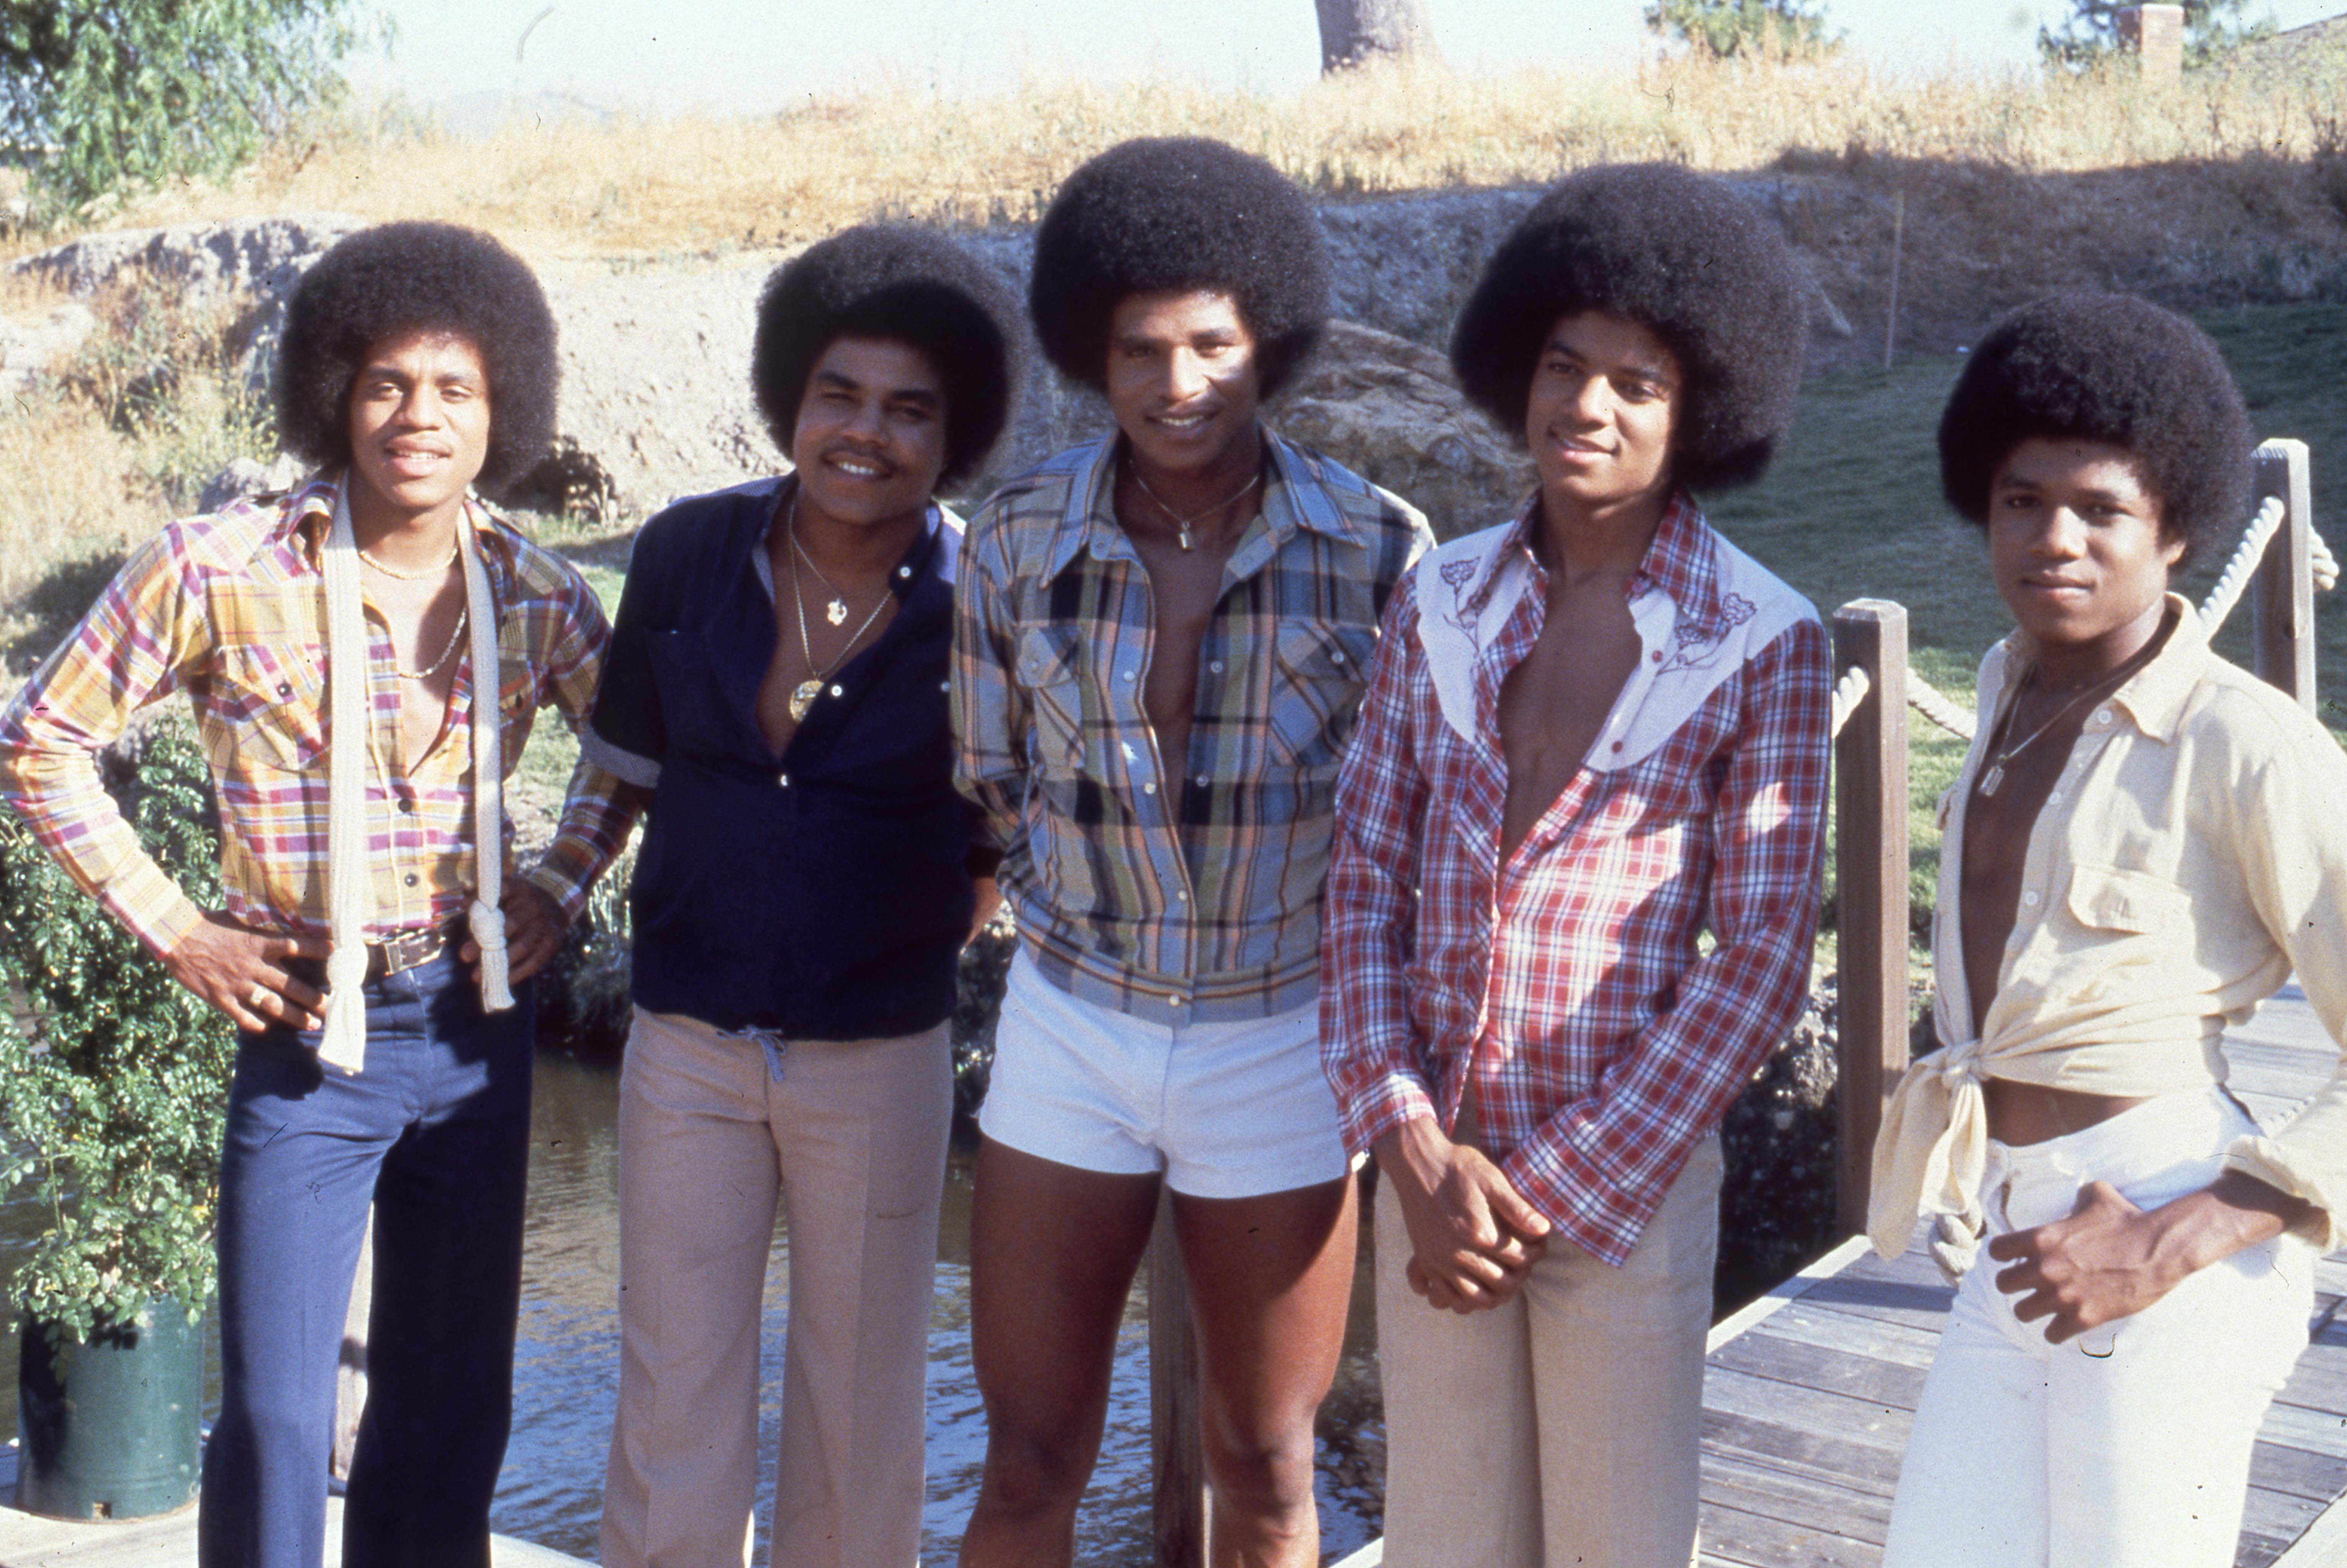 Michael Jackson and his brothers vacationing together circa 1974.